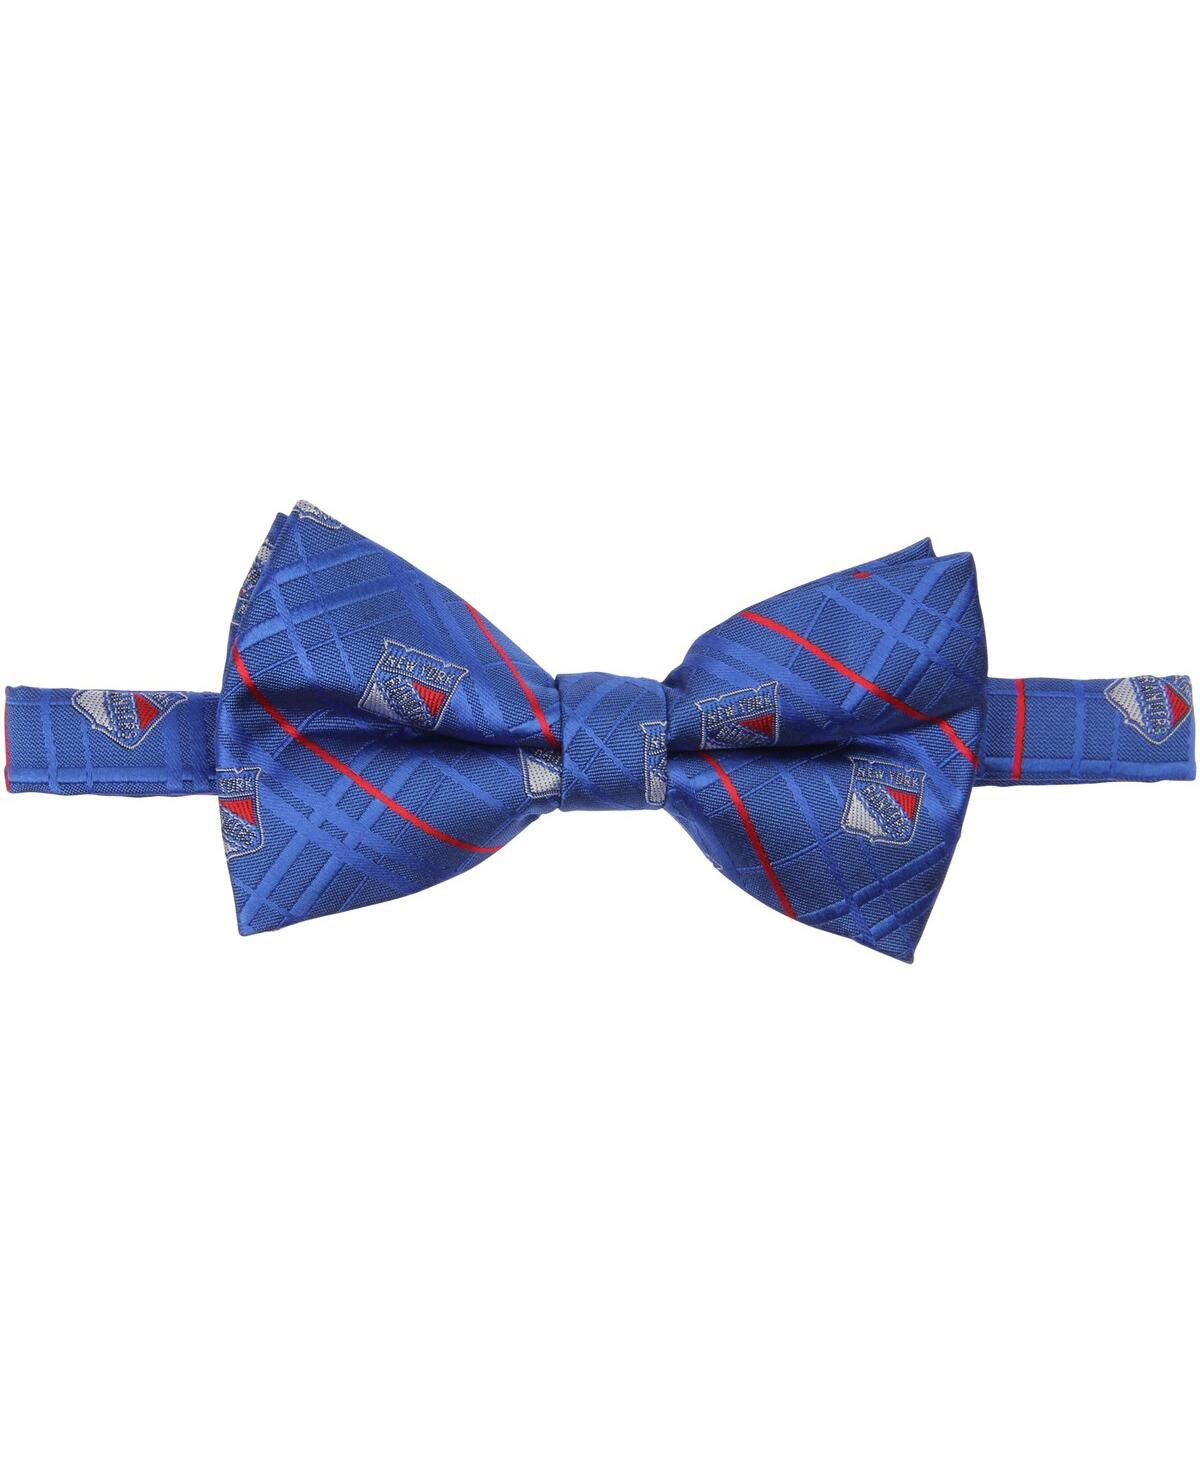 Eagles Wings Men's New York Rangers Oxford Bow Tie In Royal